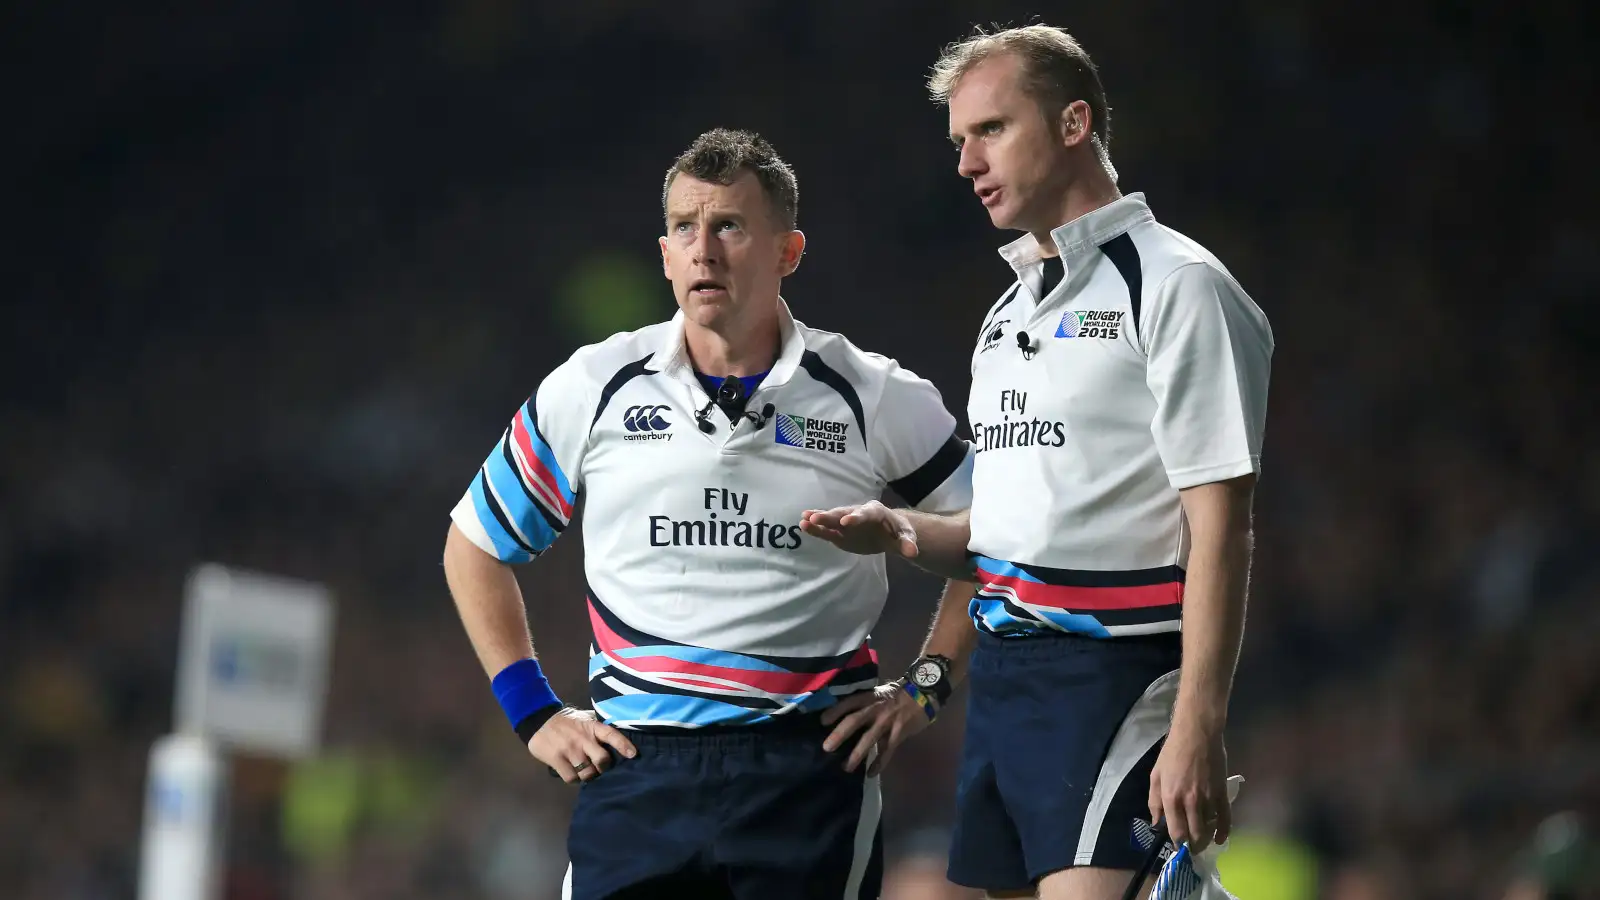 Nigel Owens and Wayne Barnes officiating at the 2015 Rugby World Cup.